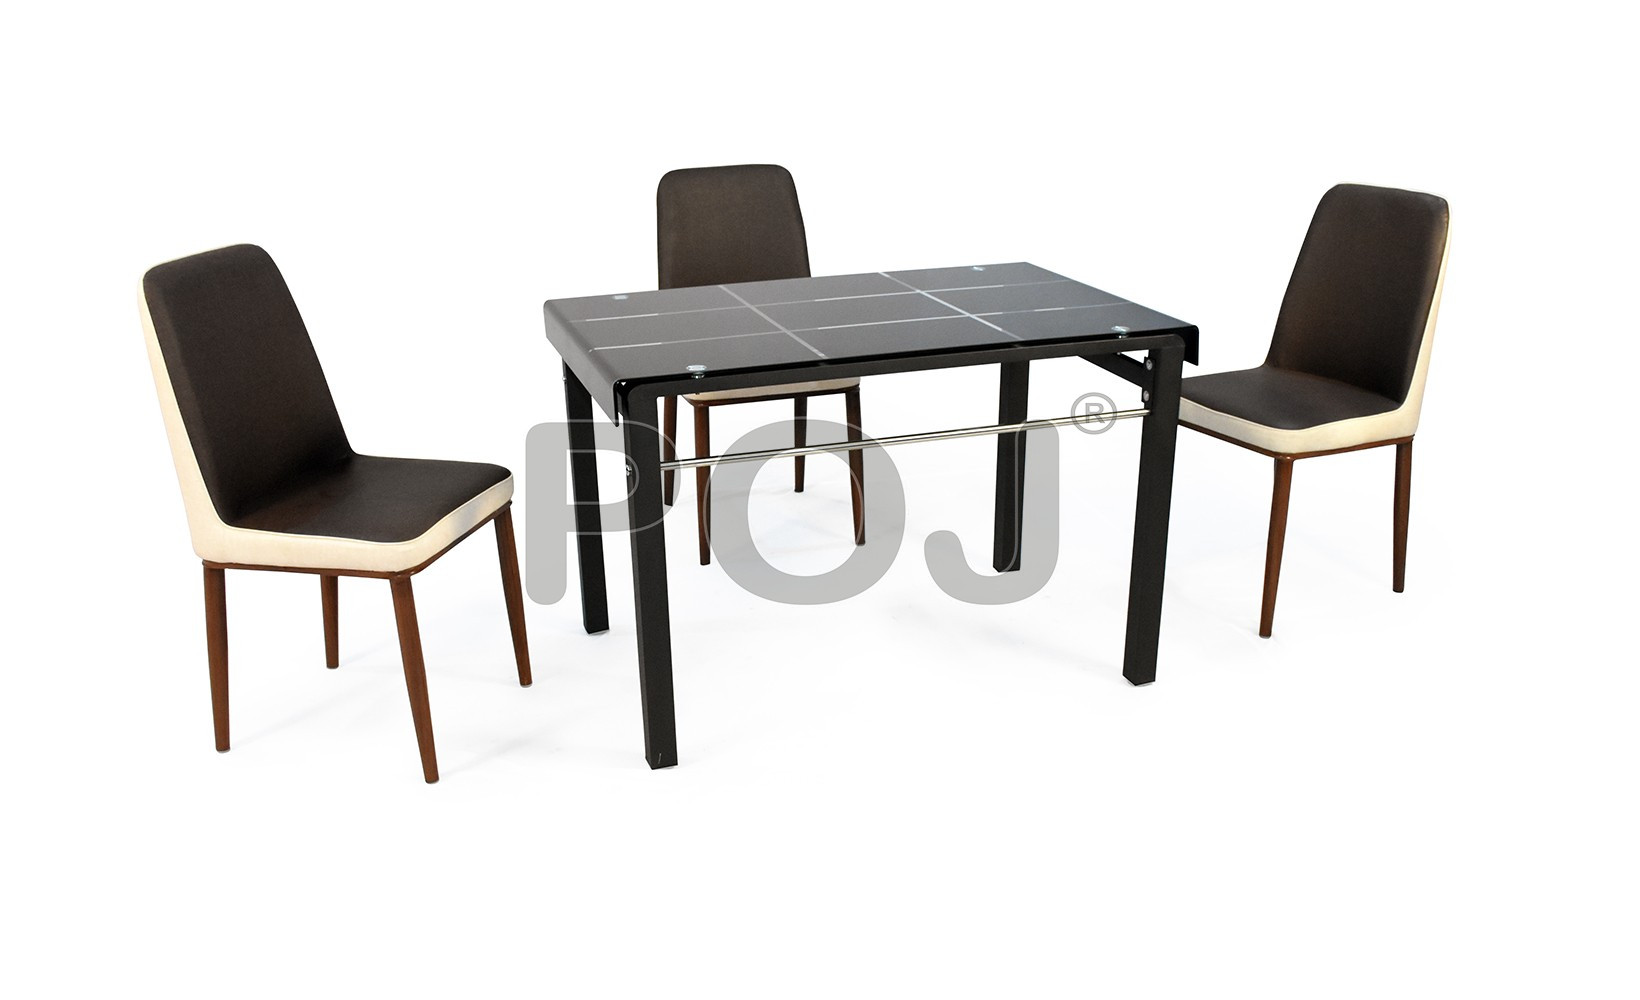 Bella 4 Seater Dining Table With Tempered Glass On Top